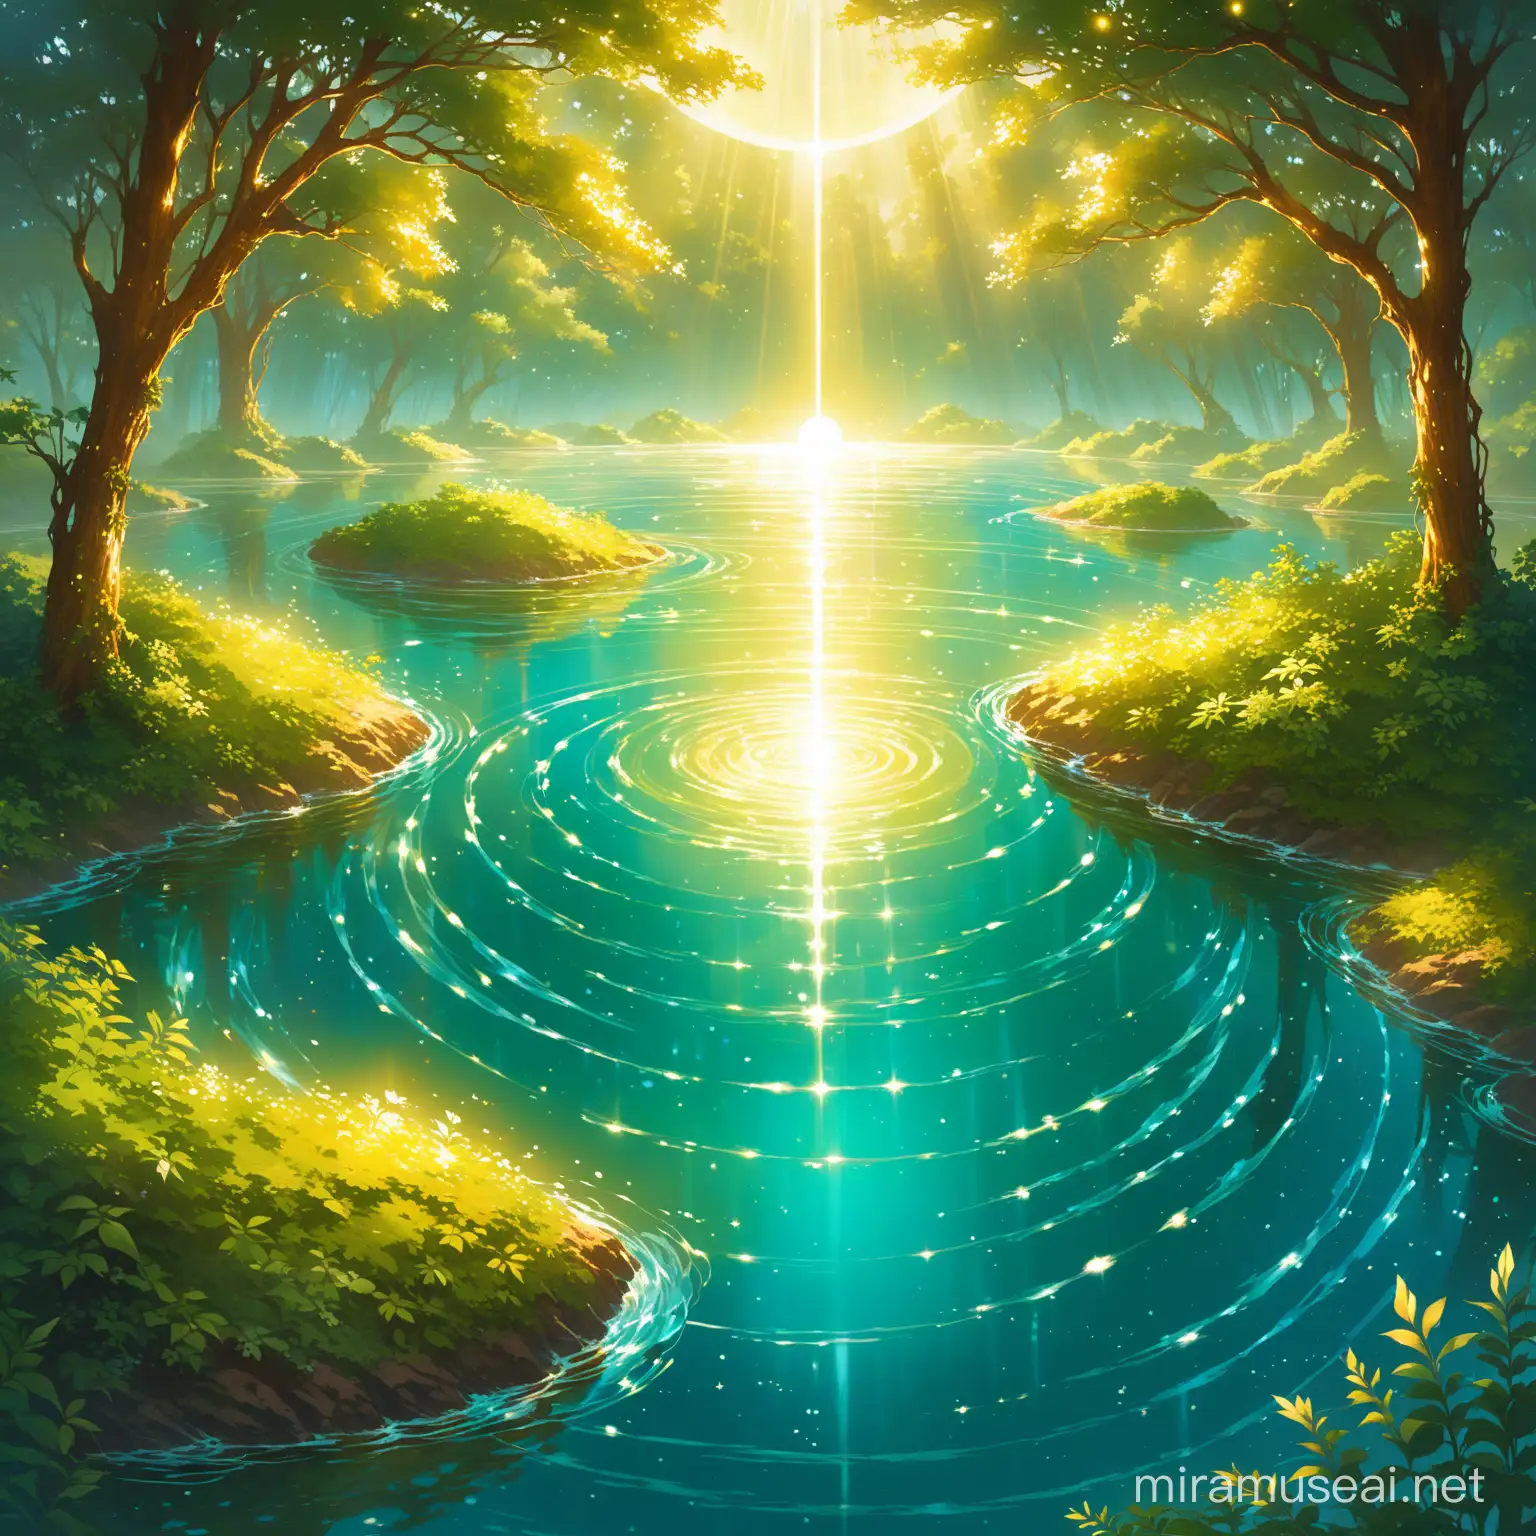 Radiant SelfIlluminated Planet with Rusty Silver and Golden Glow Surrounded by Lush Greens and Pristine Waters Angelic Habitat